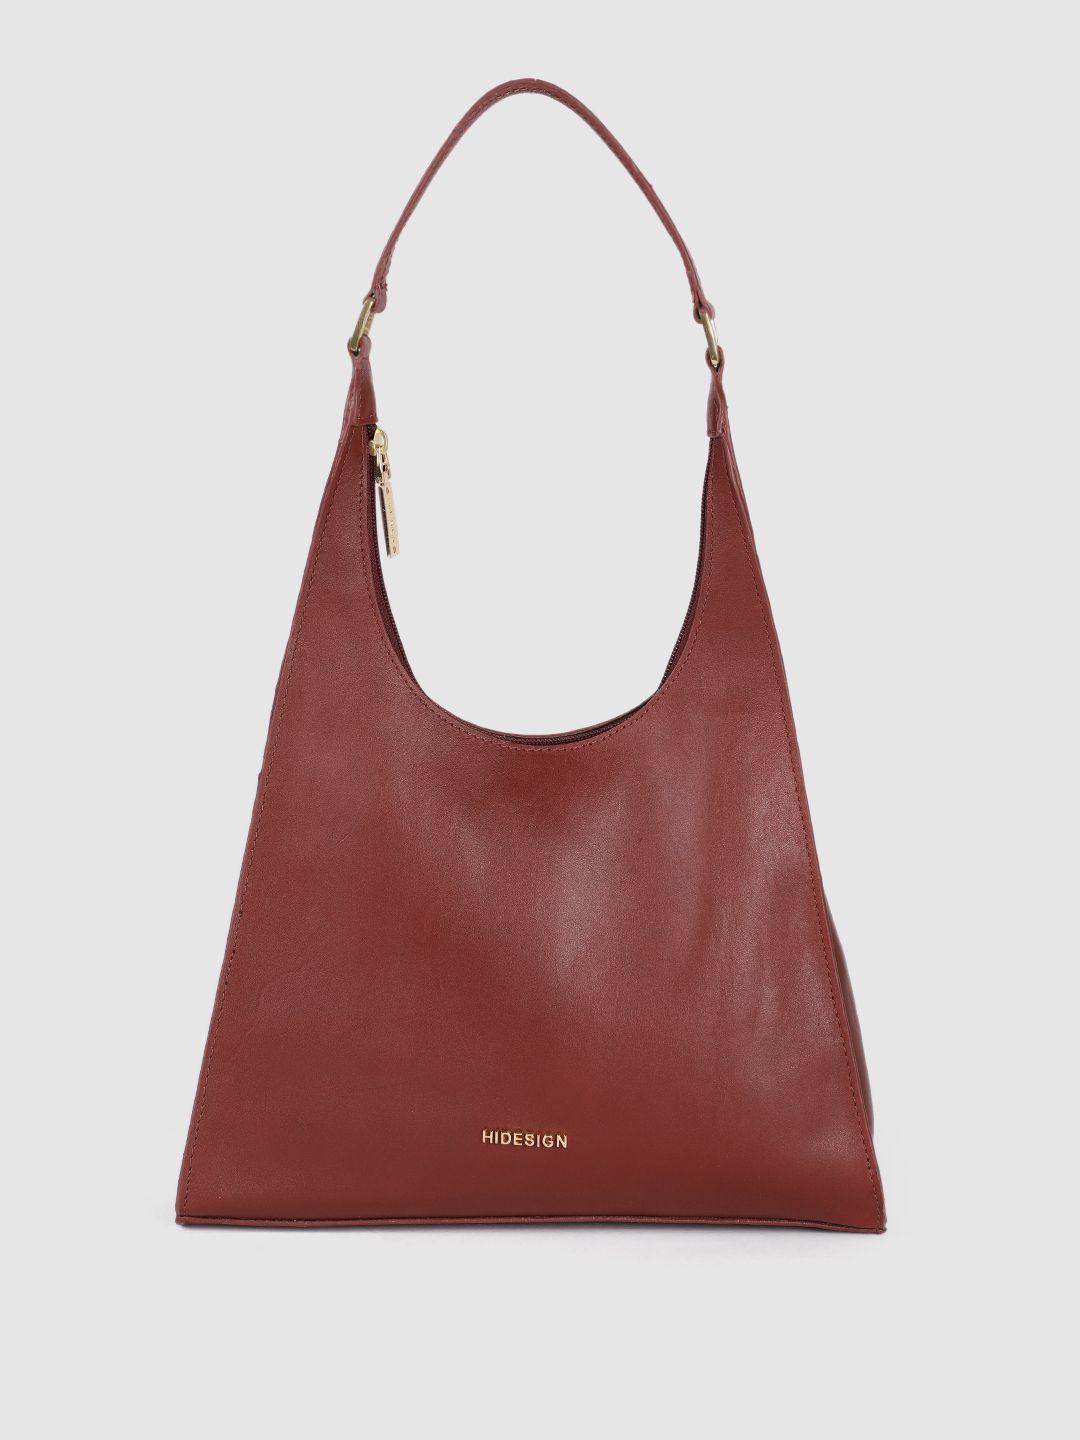 hidesign maroon leather structured hobo bag